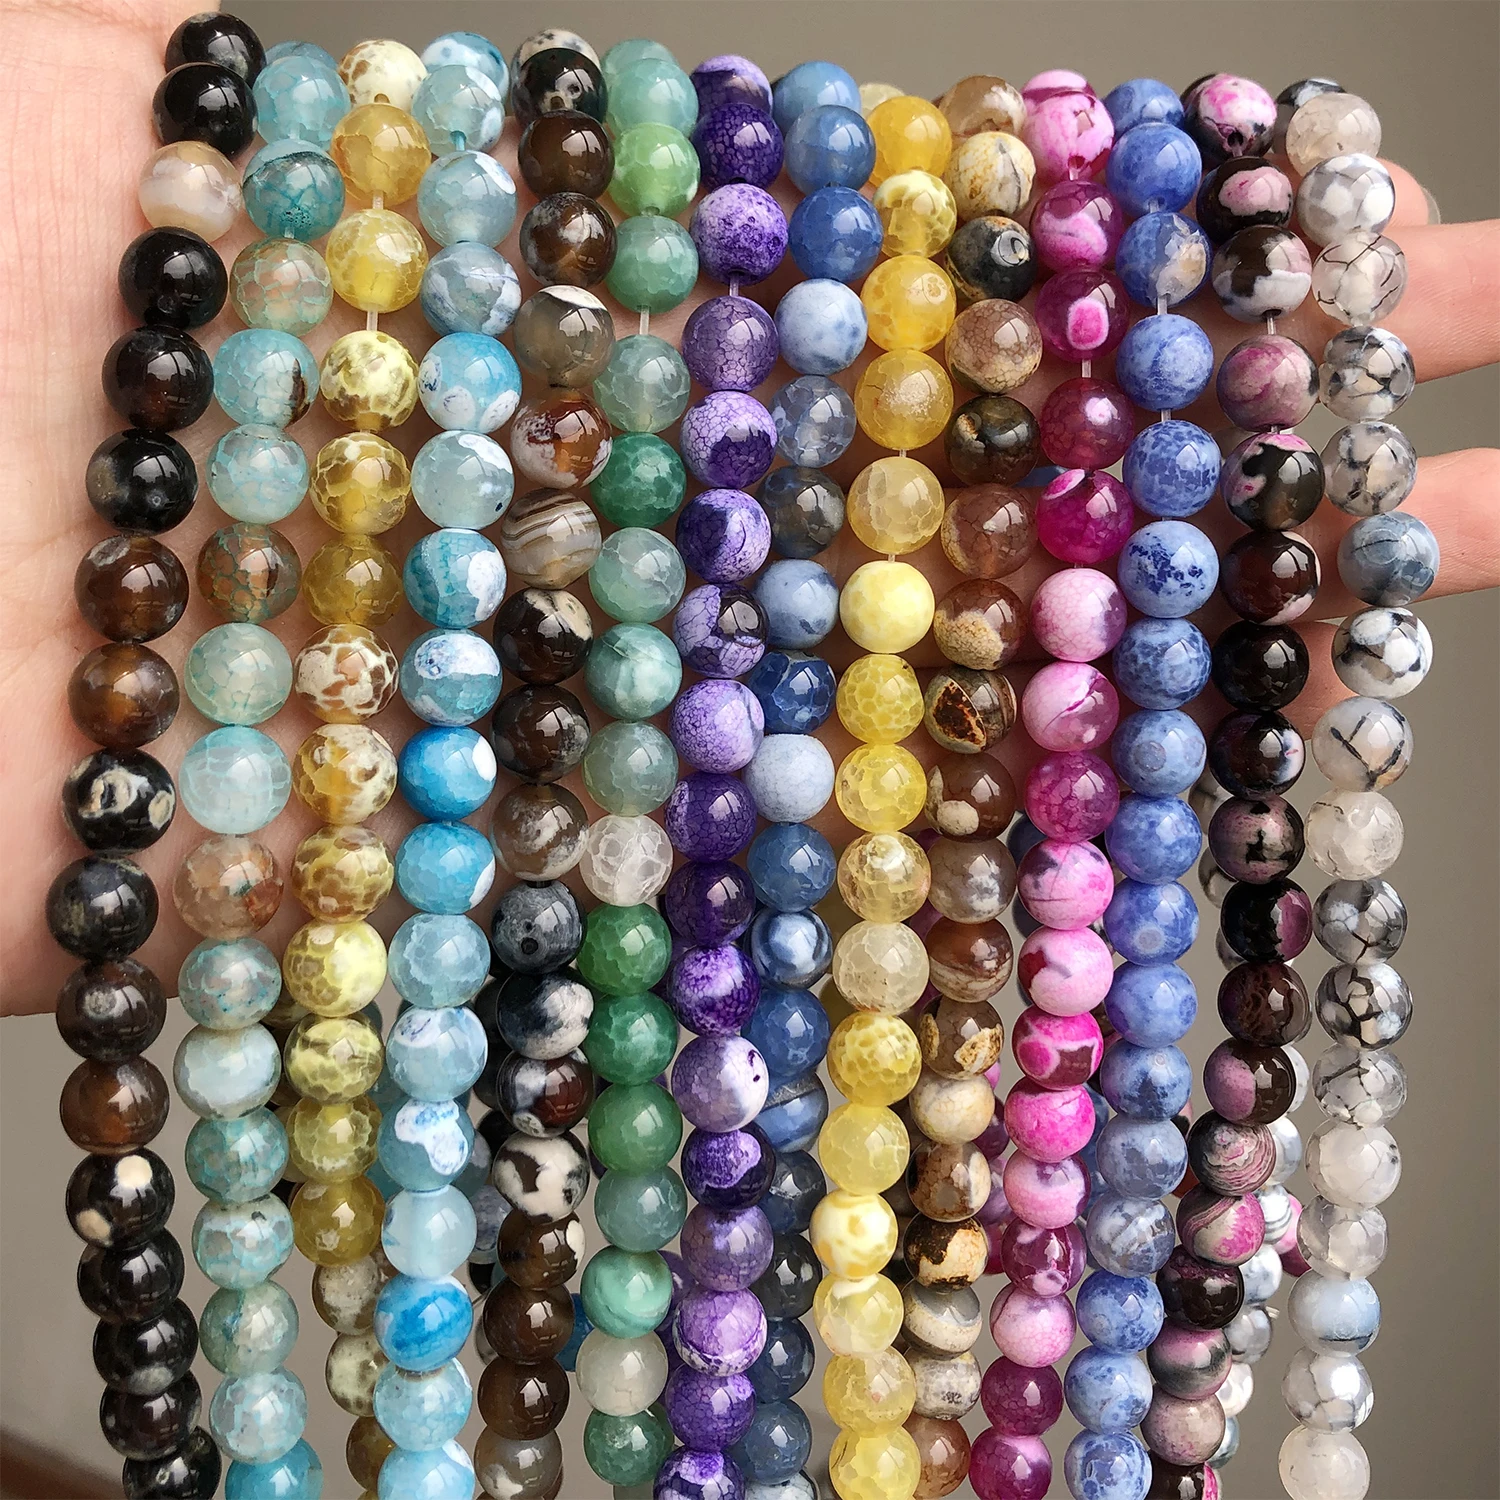 

Natural Stone Colorful Fire Dragon Veins Agates Loose Spacer Beads for Jewelry Making DIY Bracelet Necklace Charms 15'' 6/8/10mm